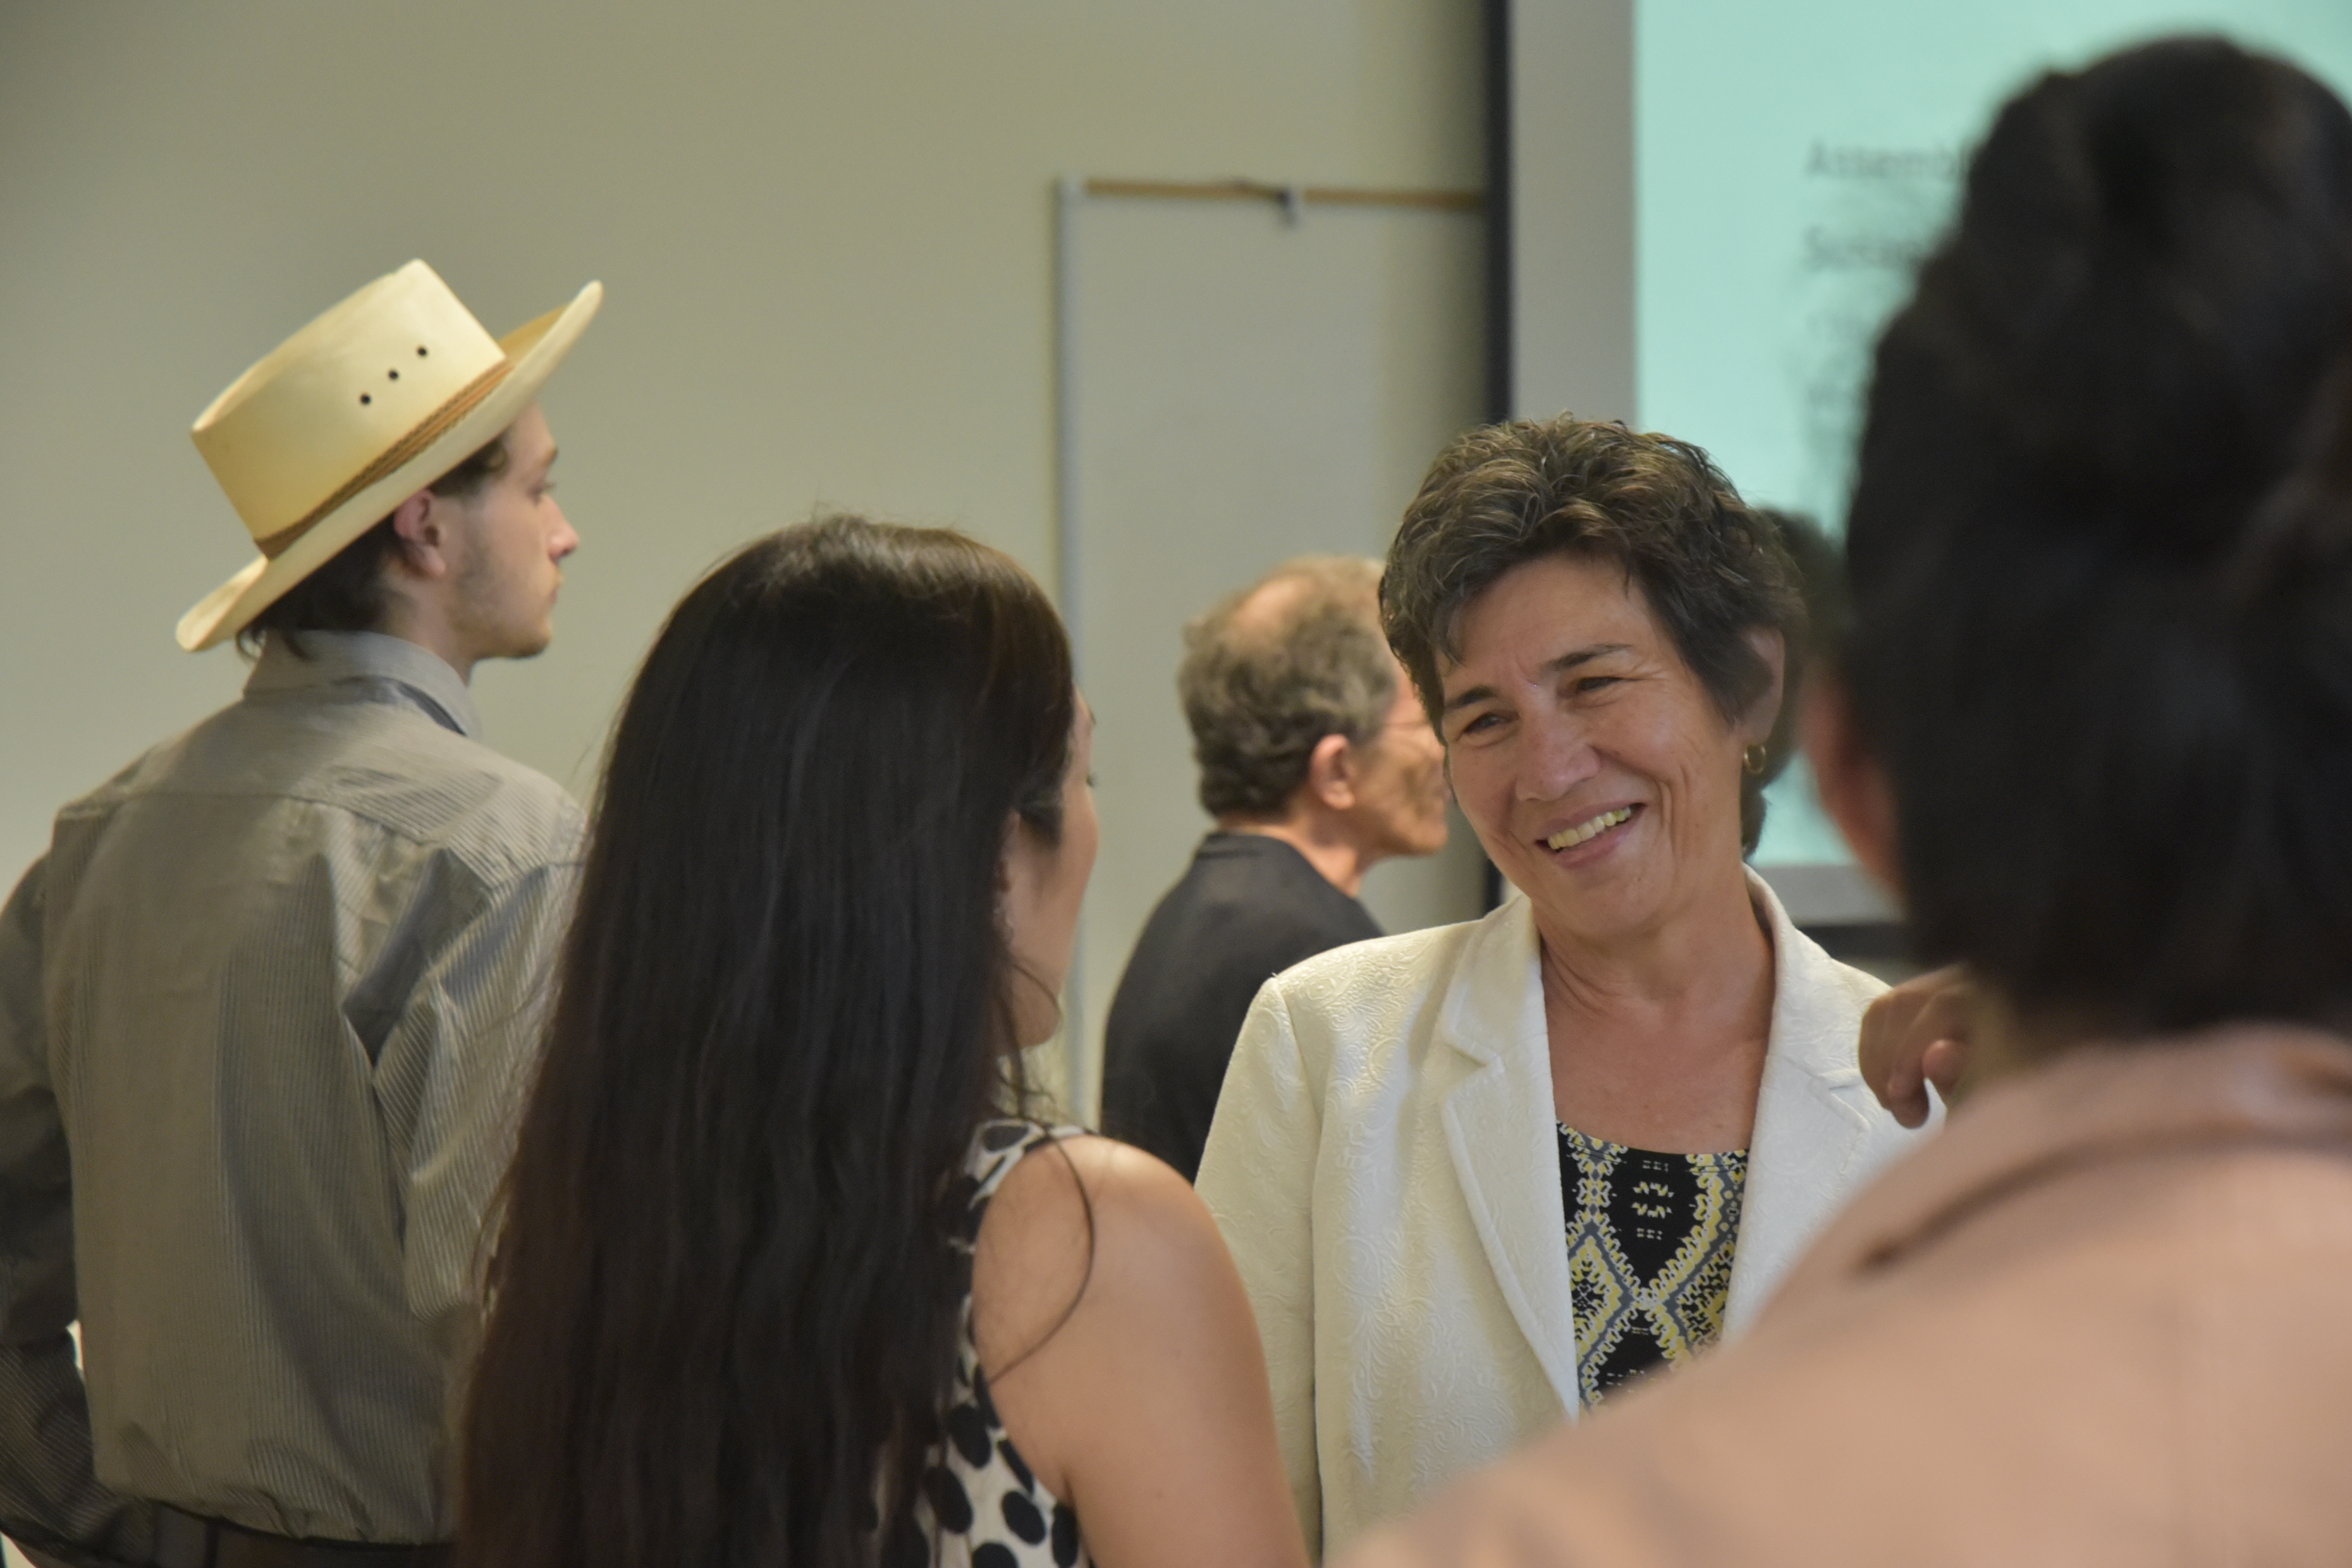 Assemblywoman Susan Eggman meets with San Joaquin Delta College students at the first Alumni Night and Political Meet and Greet on April 18.